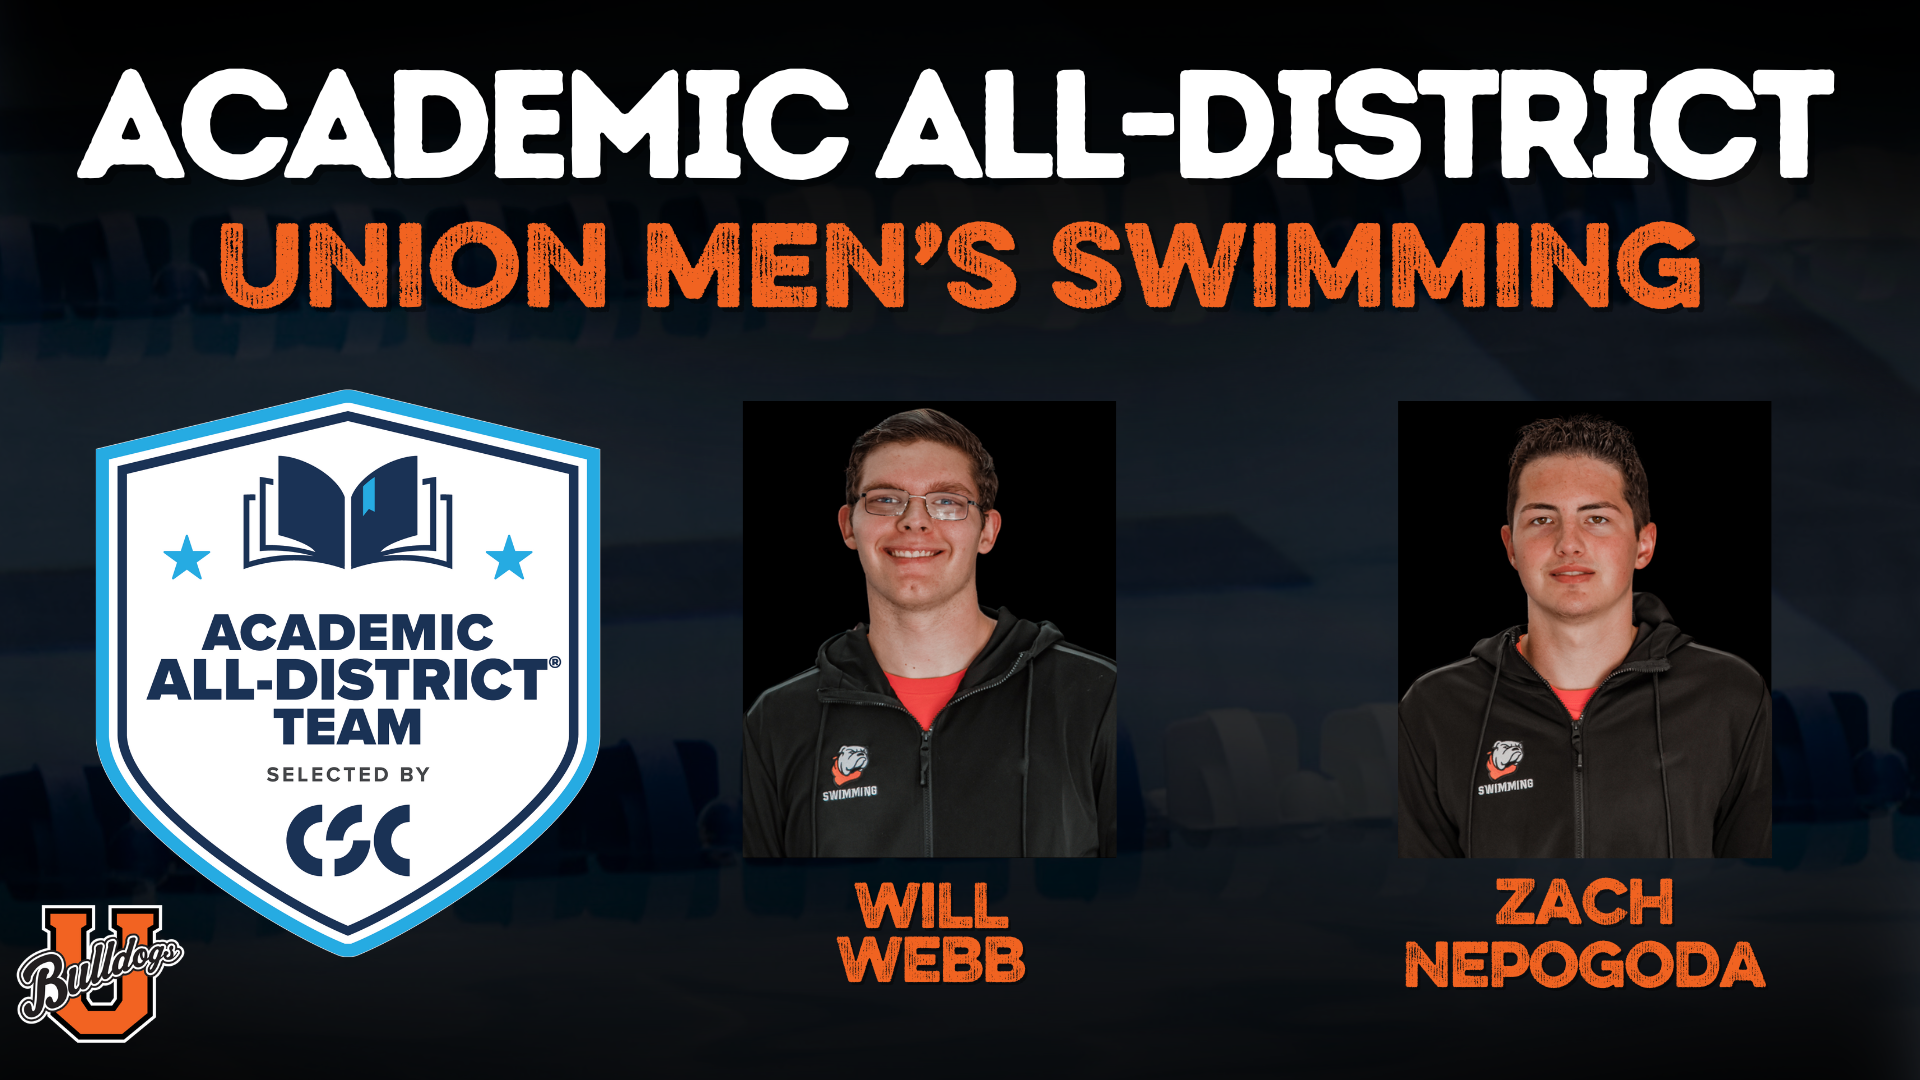 Union swimmers Webb and Nepogoda named to CSC Academic All-District Team